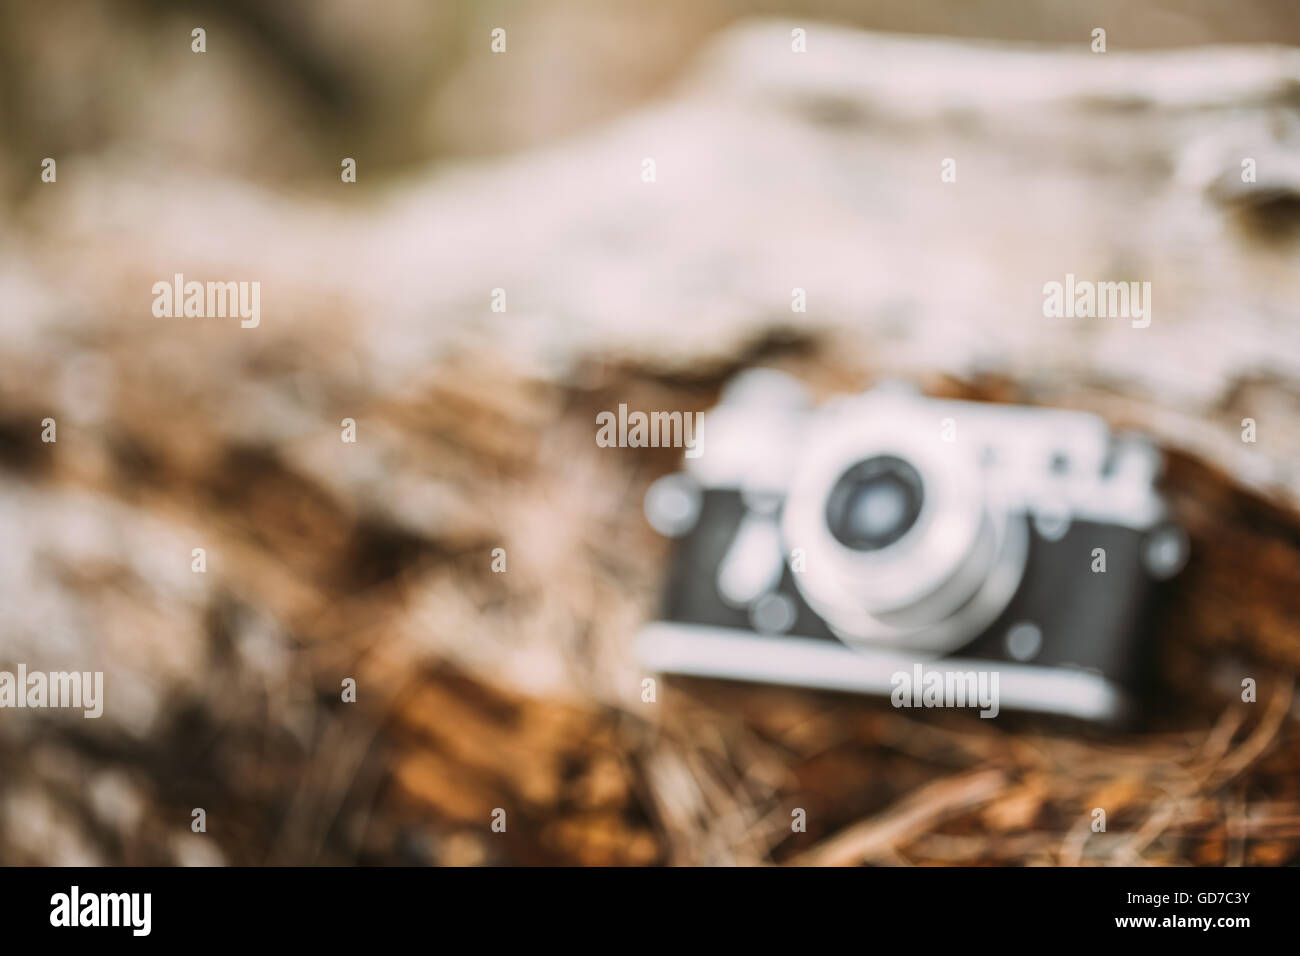 Abstract Blurred Background Of Old Vintage Rangefinder Camera In Forest Stock Photo